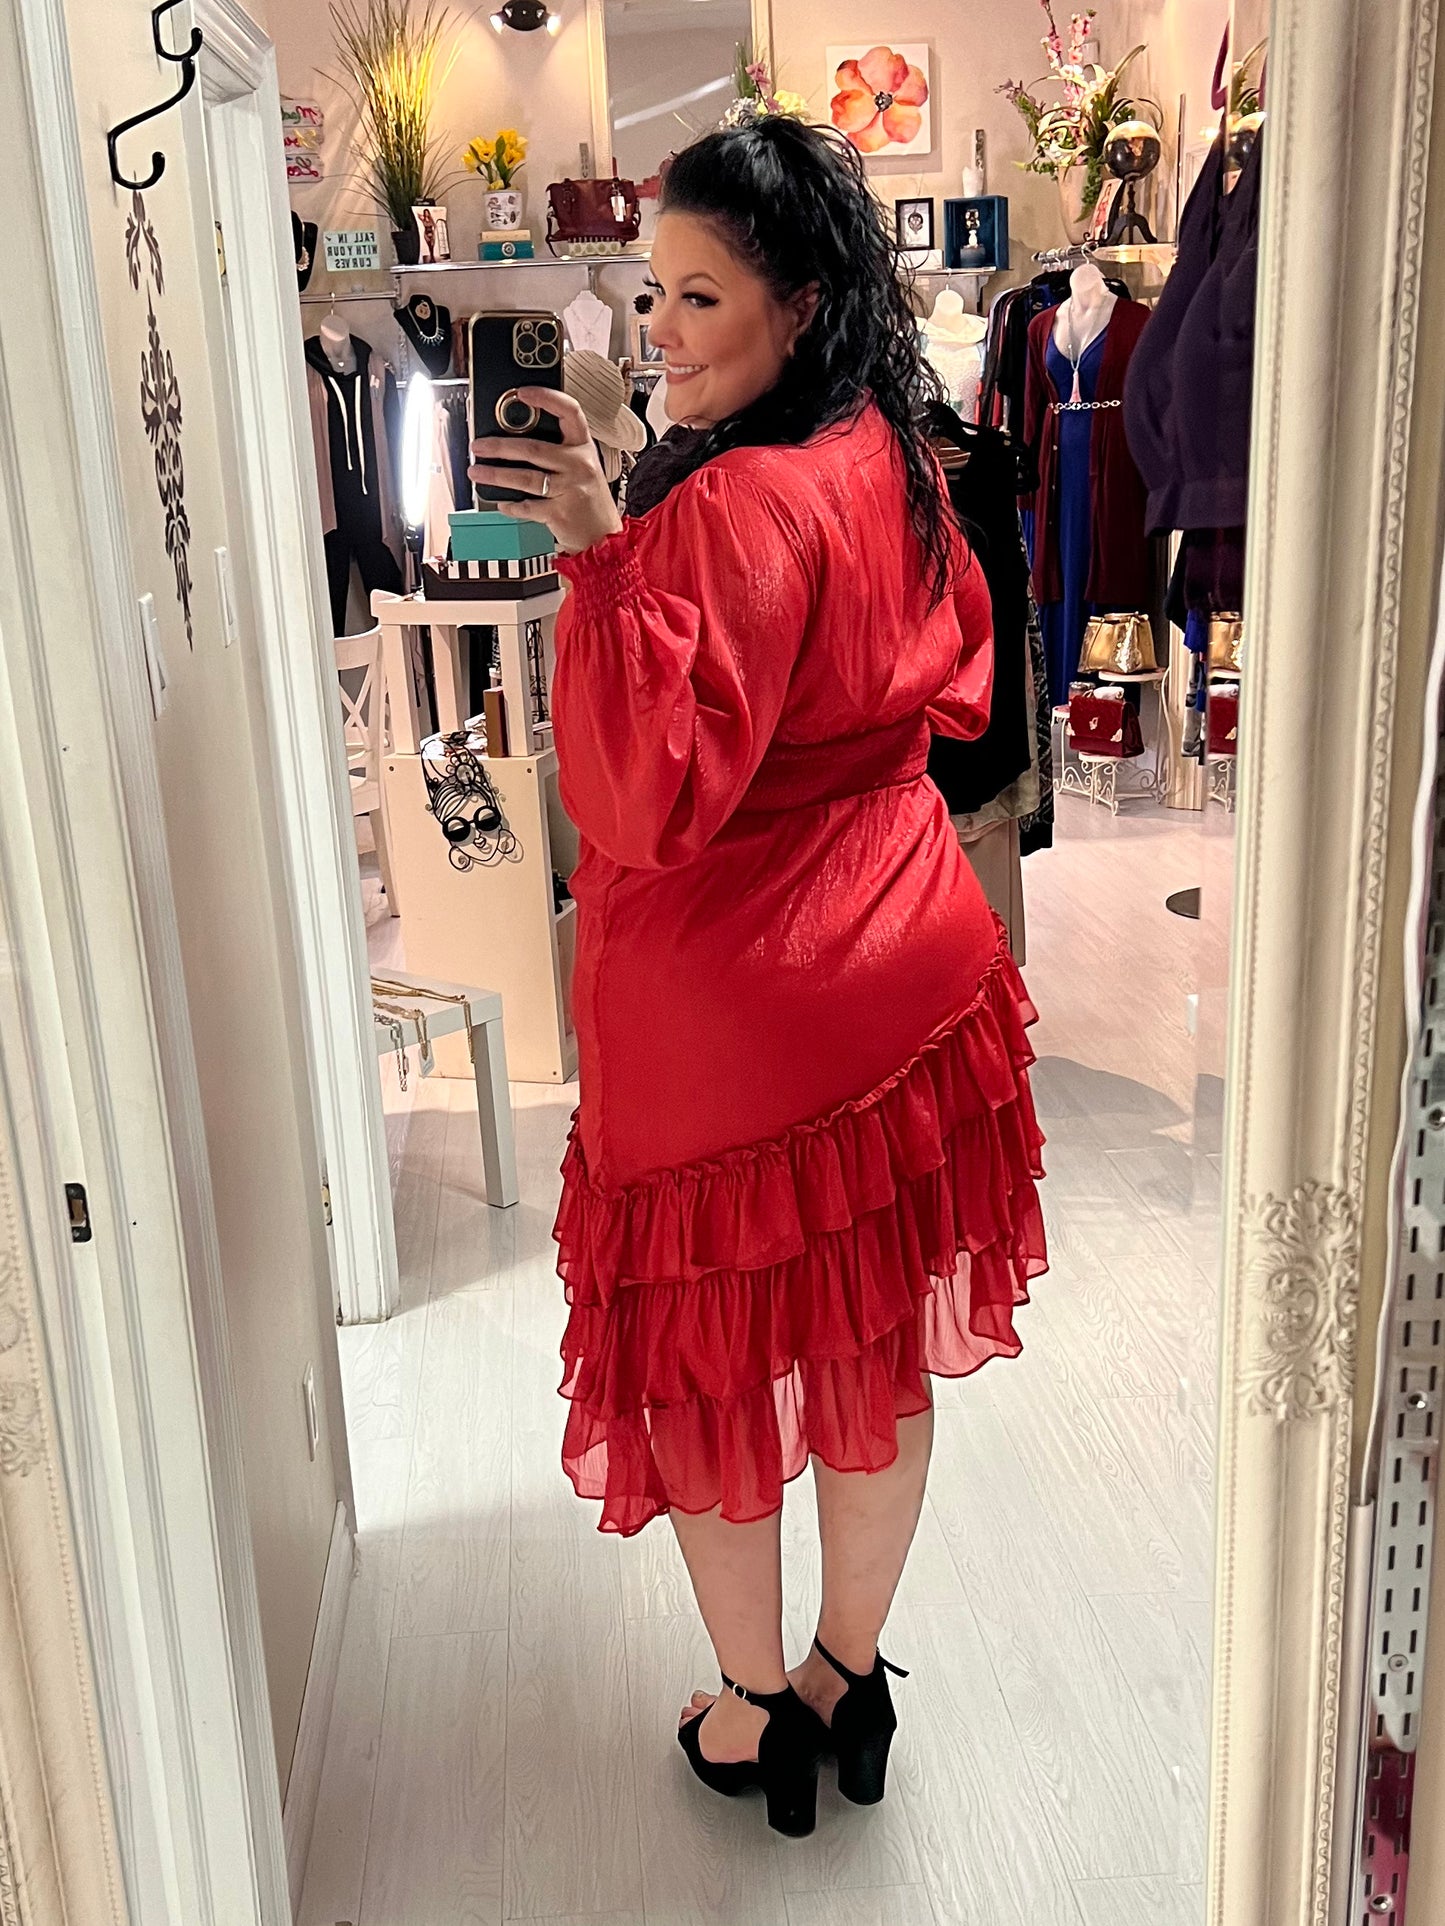 Rita Plus Size Party Dress in Candy Red